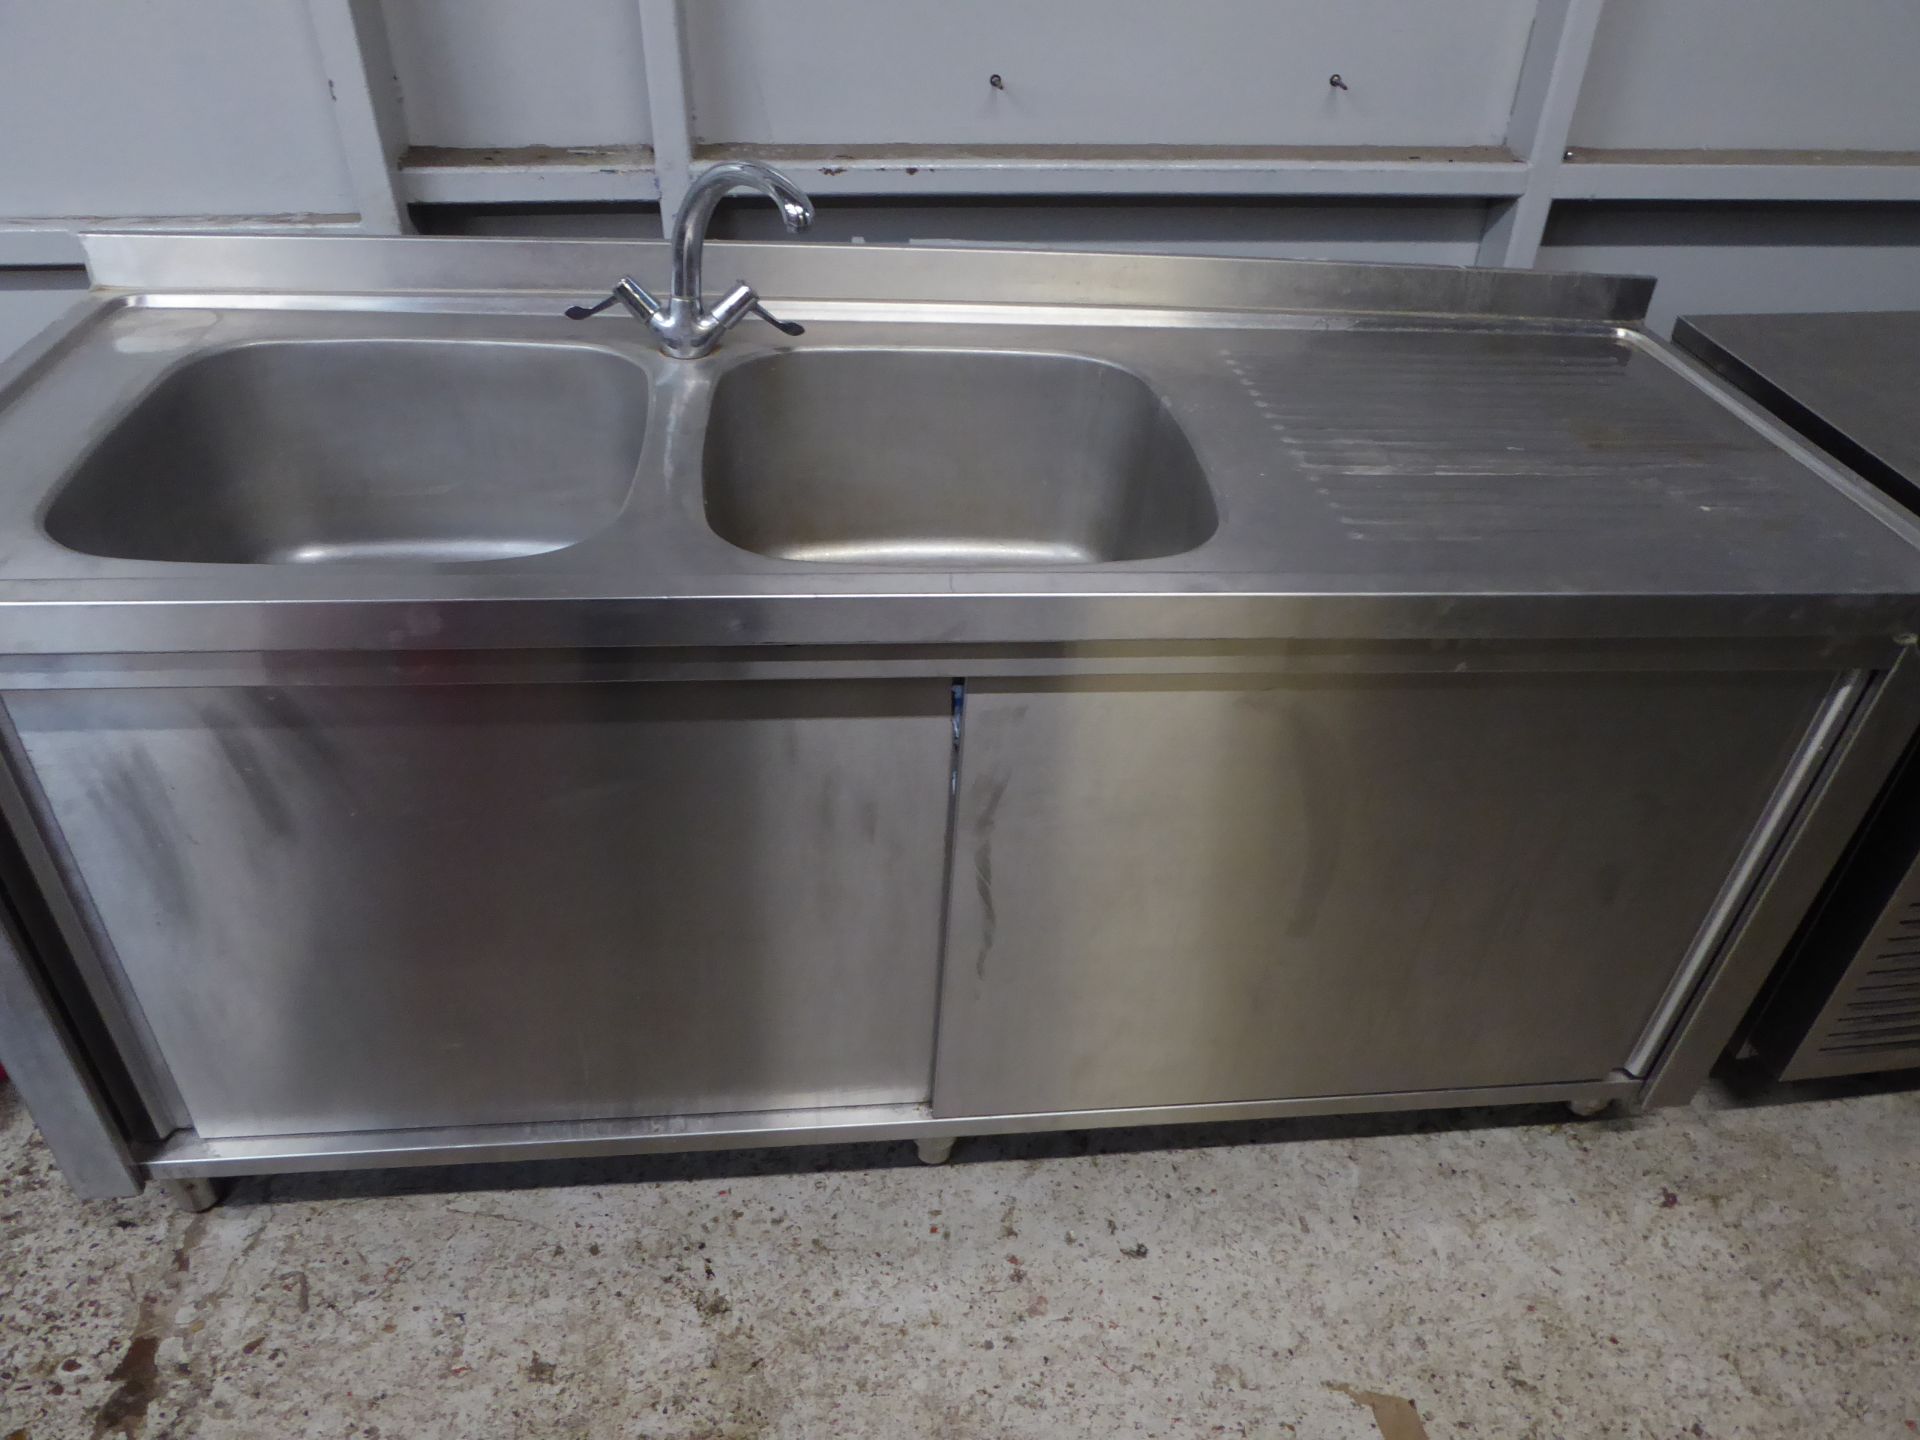 *S/S double bowl sink with right hand drainer and tap, complete with 2 sliding doors and undershelf.